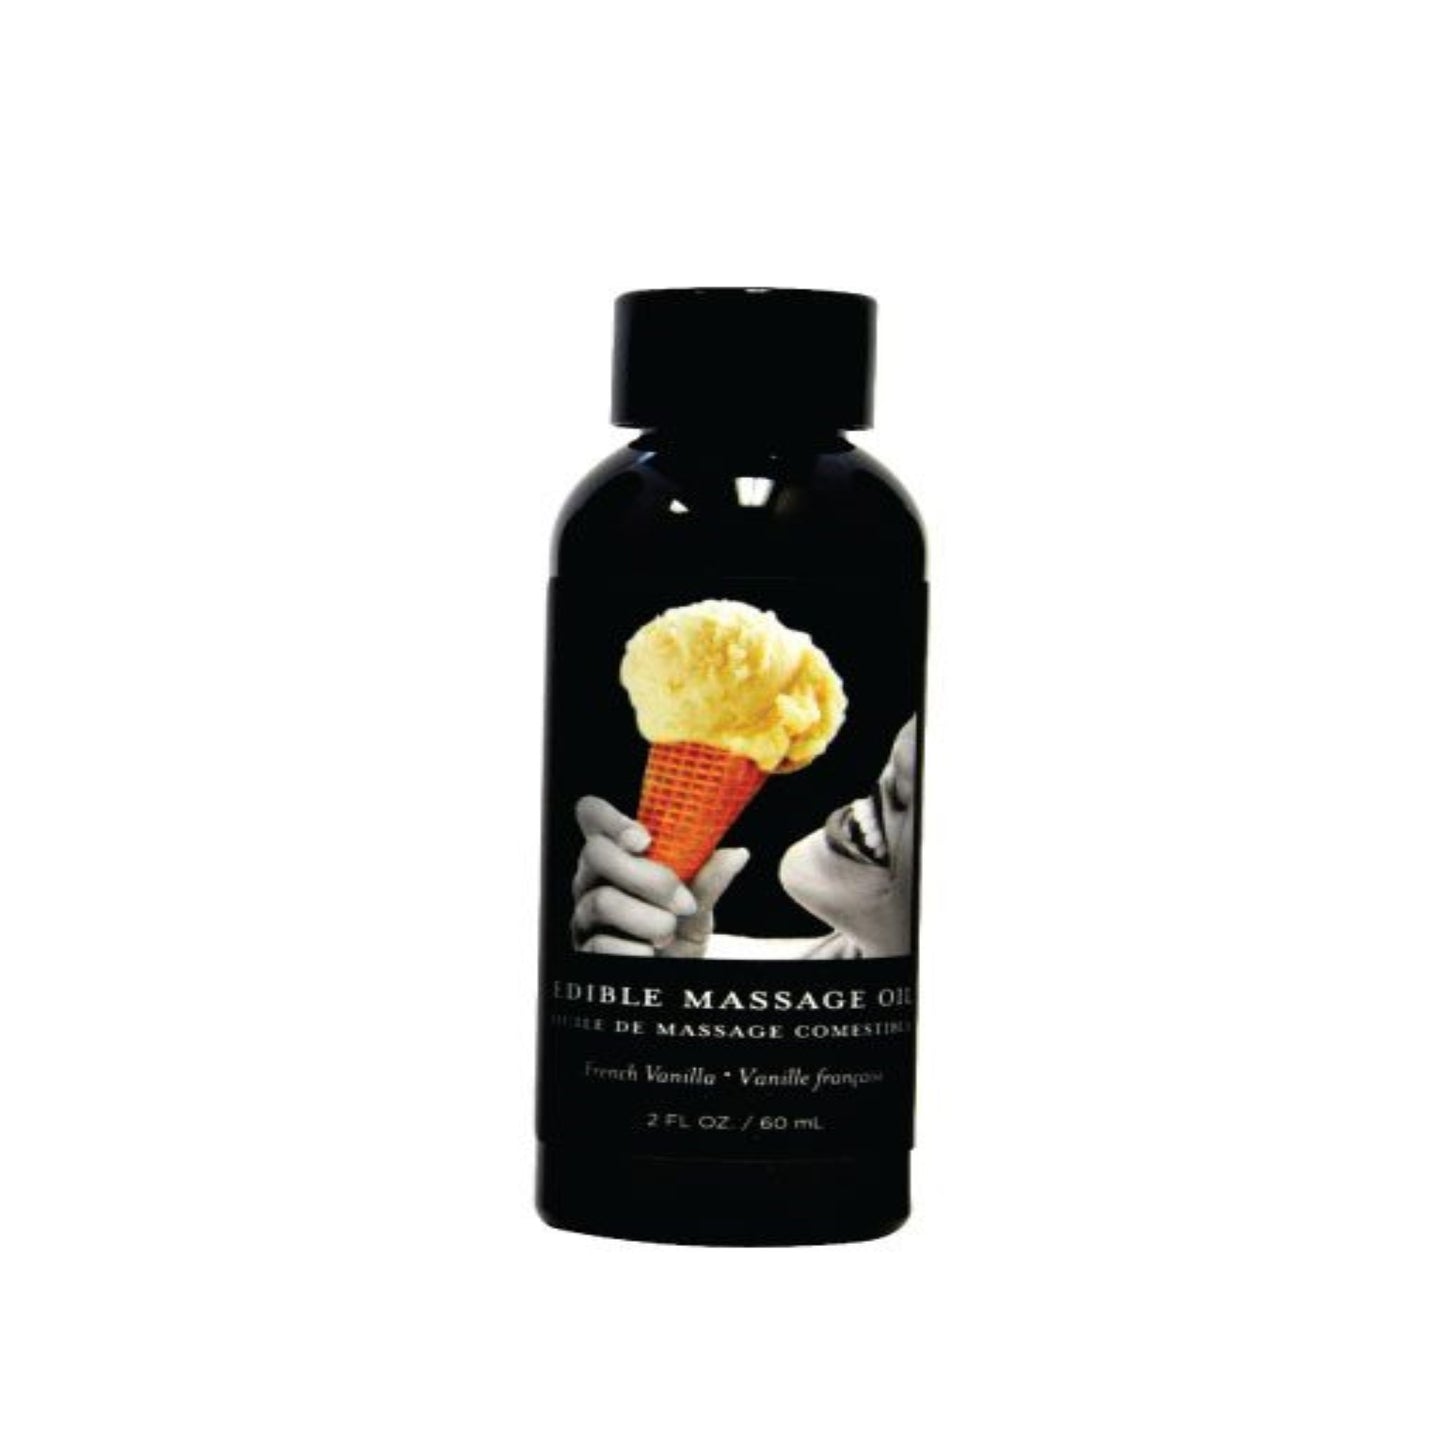 earthly-body-miracle-oil